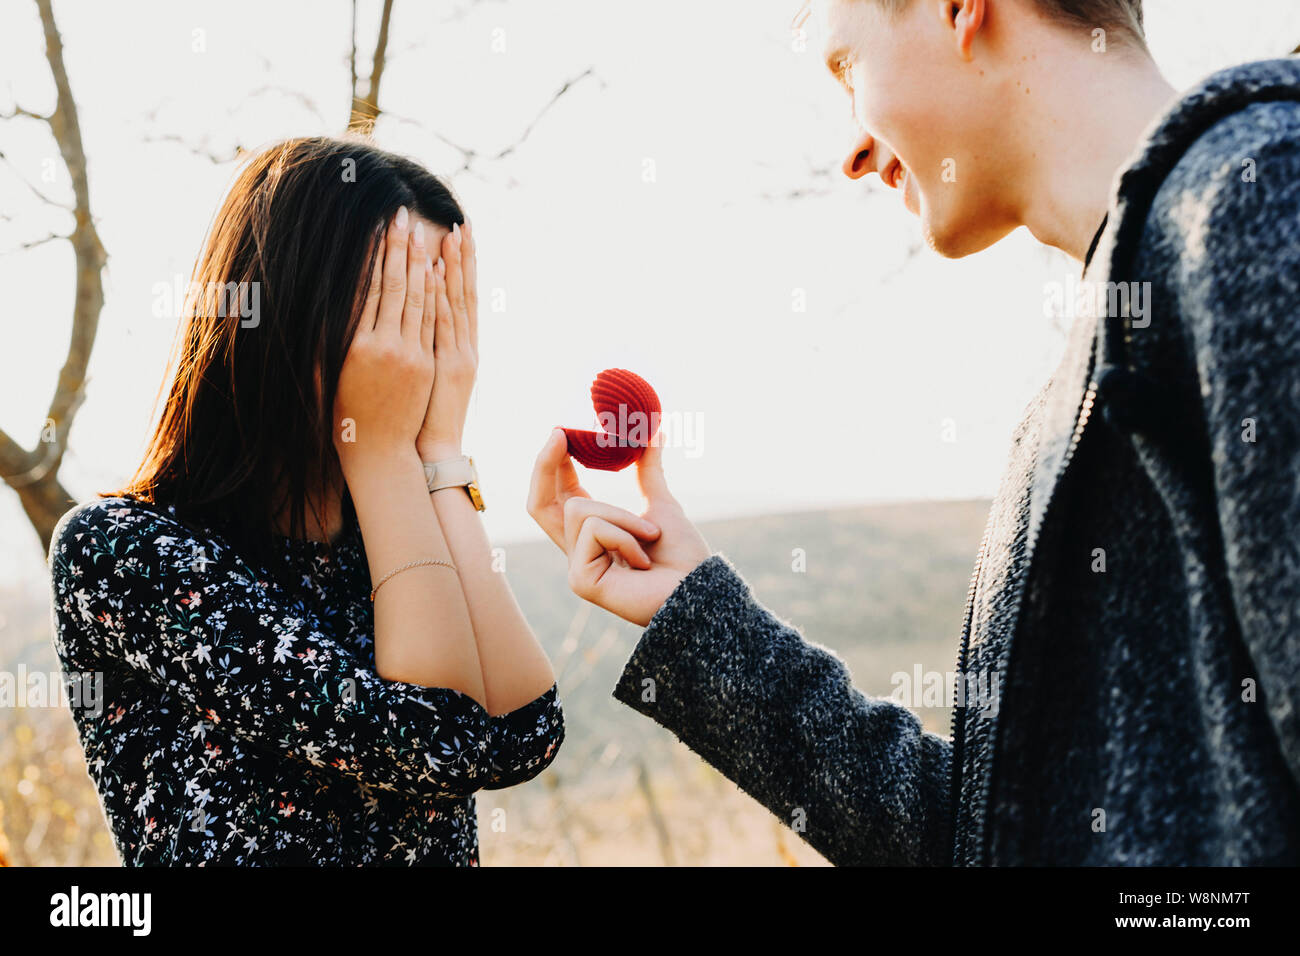 Side view of handsome young male smiling and holding small ring box while proposing to anonymous woman covering her face with hands Stock Photo